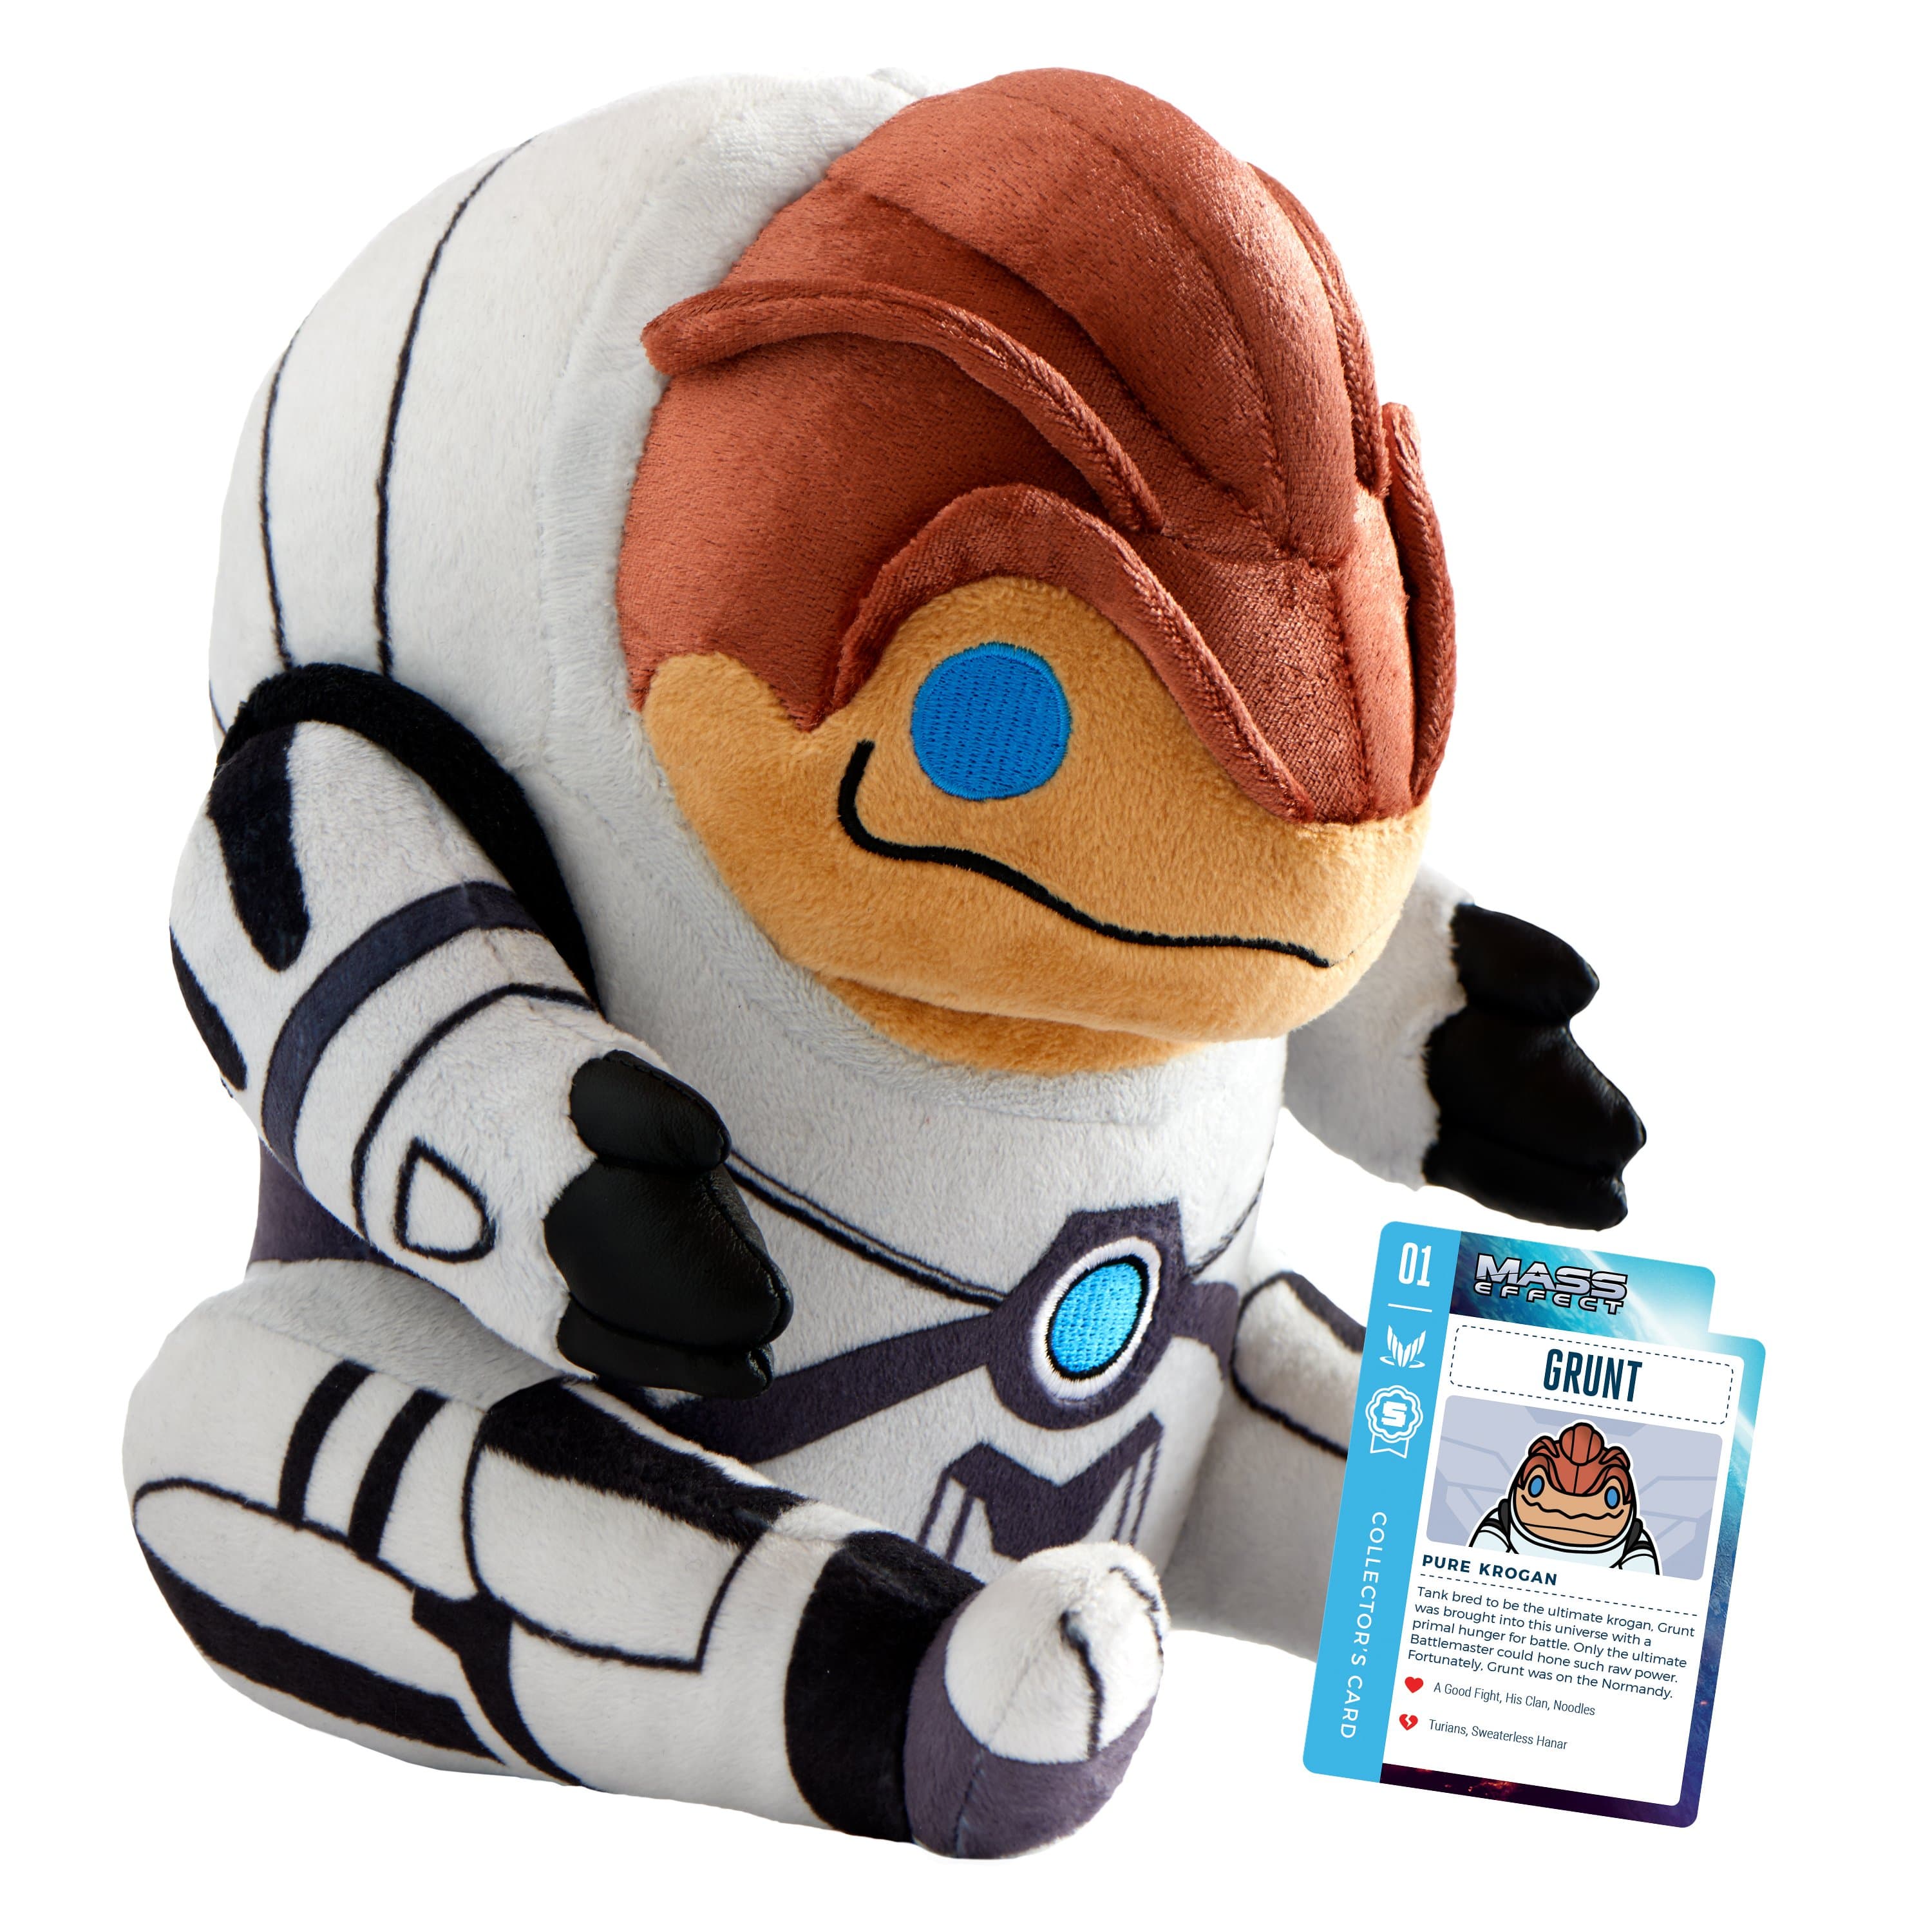 Mass Effect - Grunt Collector's  Stuffed Plush With Collector's Card